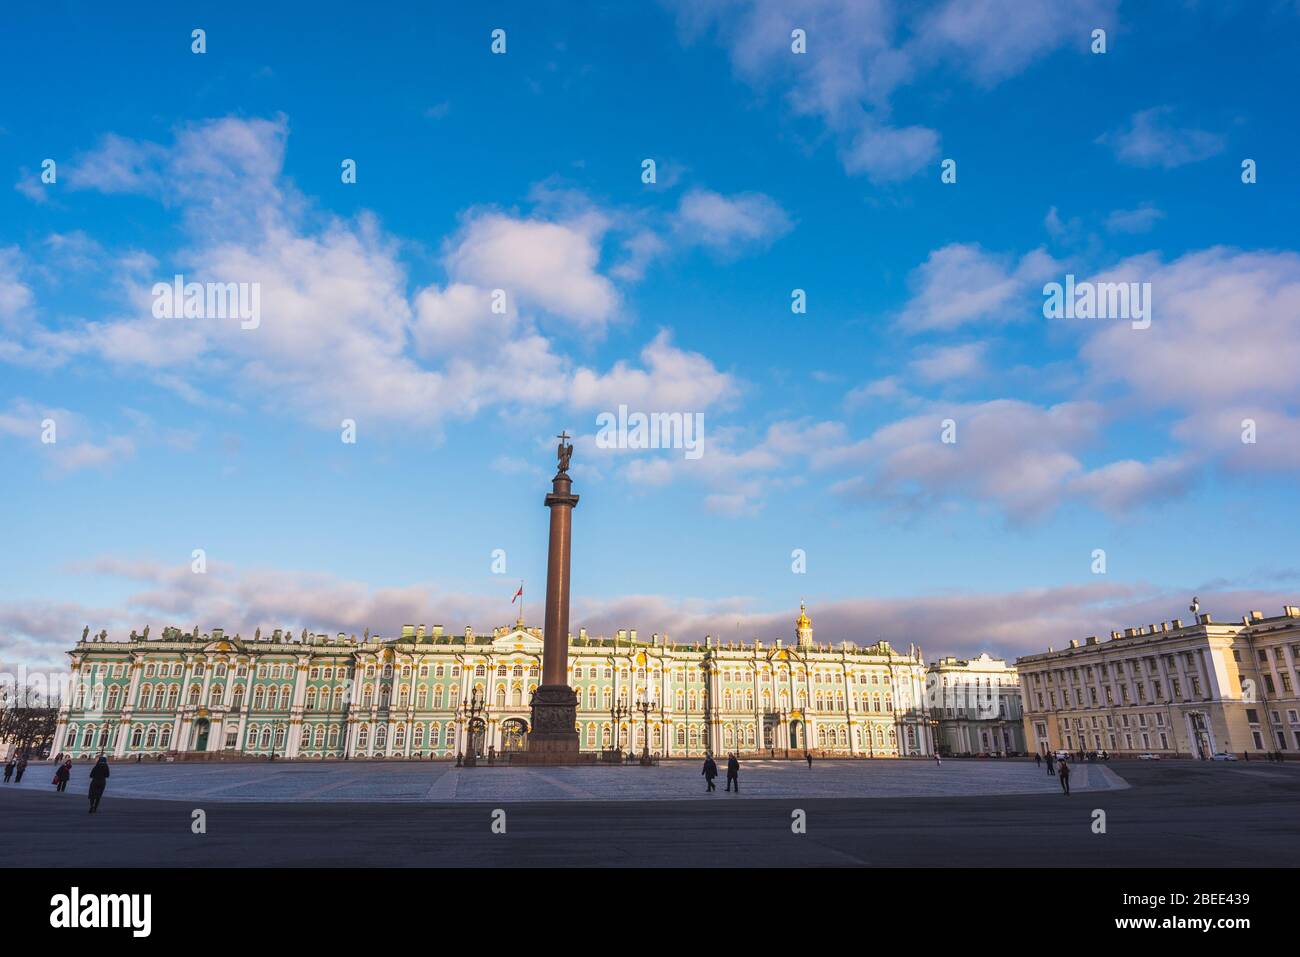 Palace Square, Alexander Column and the Hermitage. People (unrecognizable) walking and the blue sky above - Saint Petersburg, Russia. Stock Photo